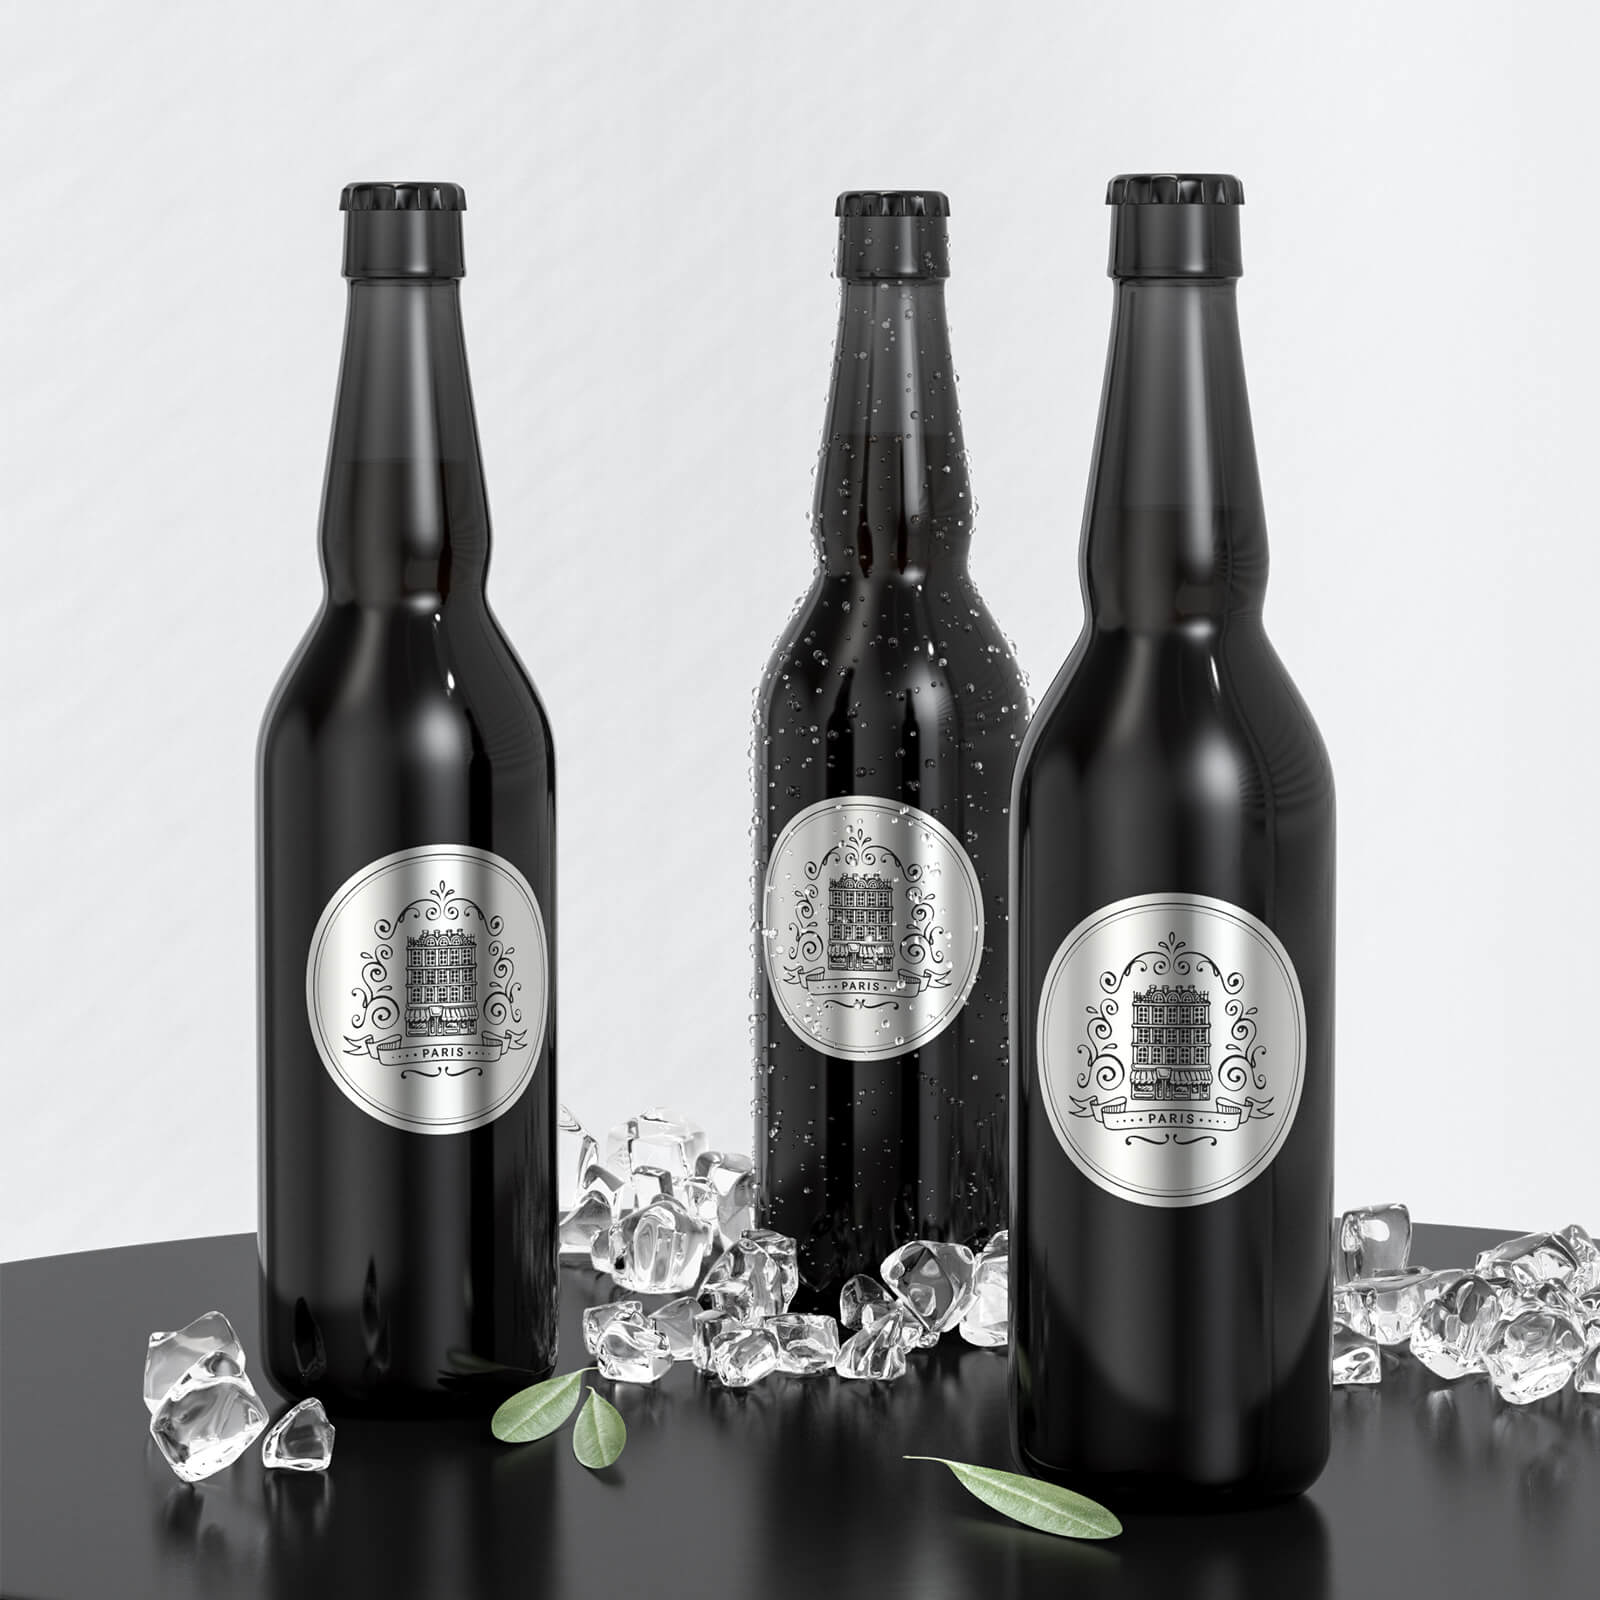 MUNBYN silver round thermal labels are perfect for boutique wines.